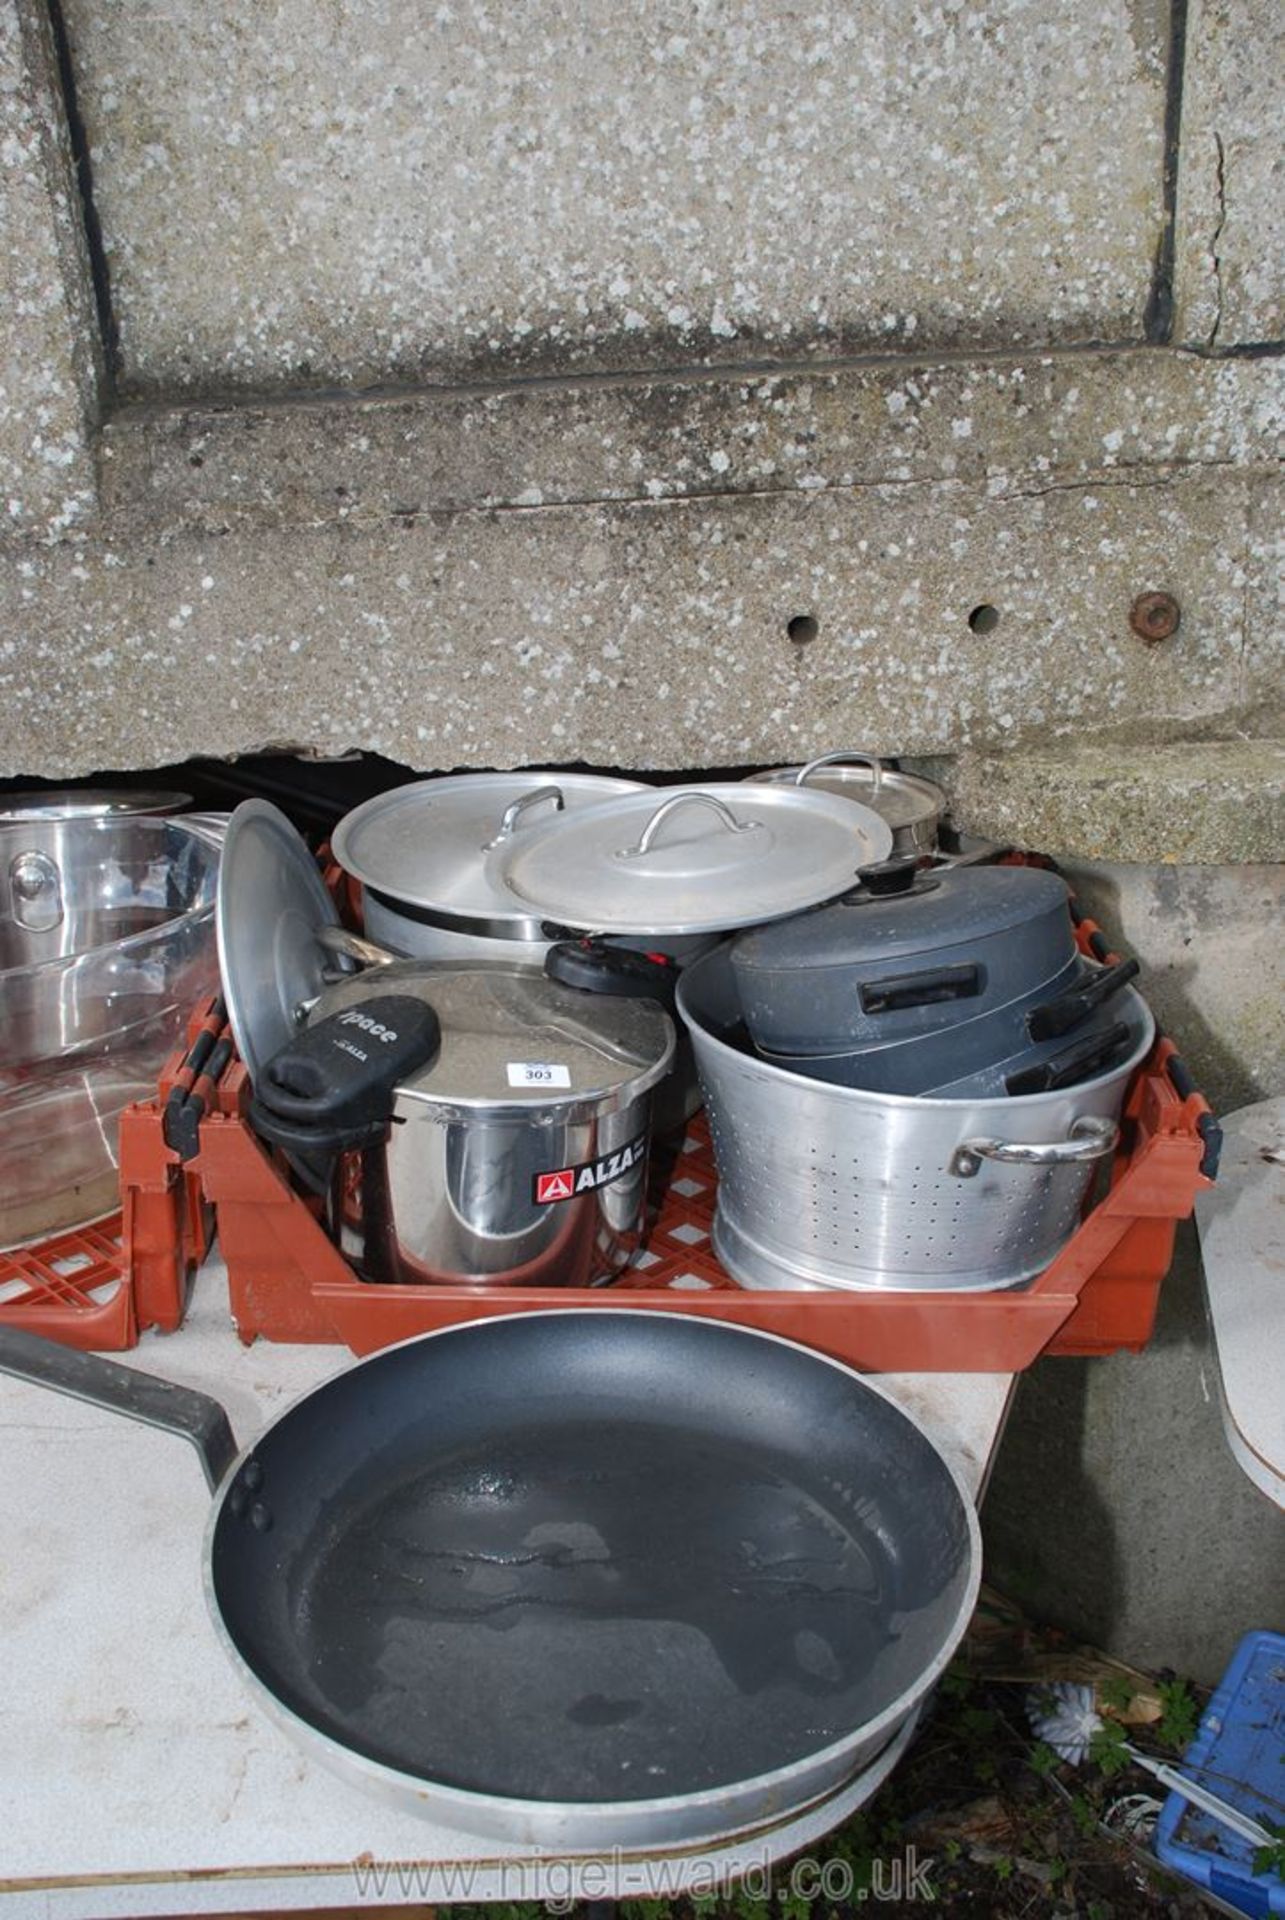 Alza Space steamer, plus large catering saucepans and frying pan, colander etc.